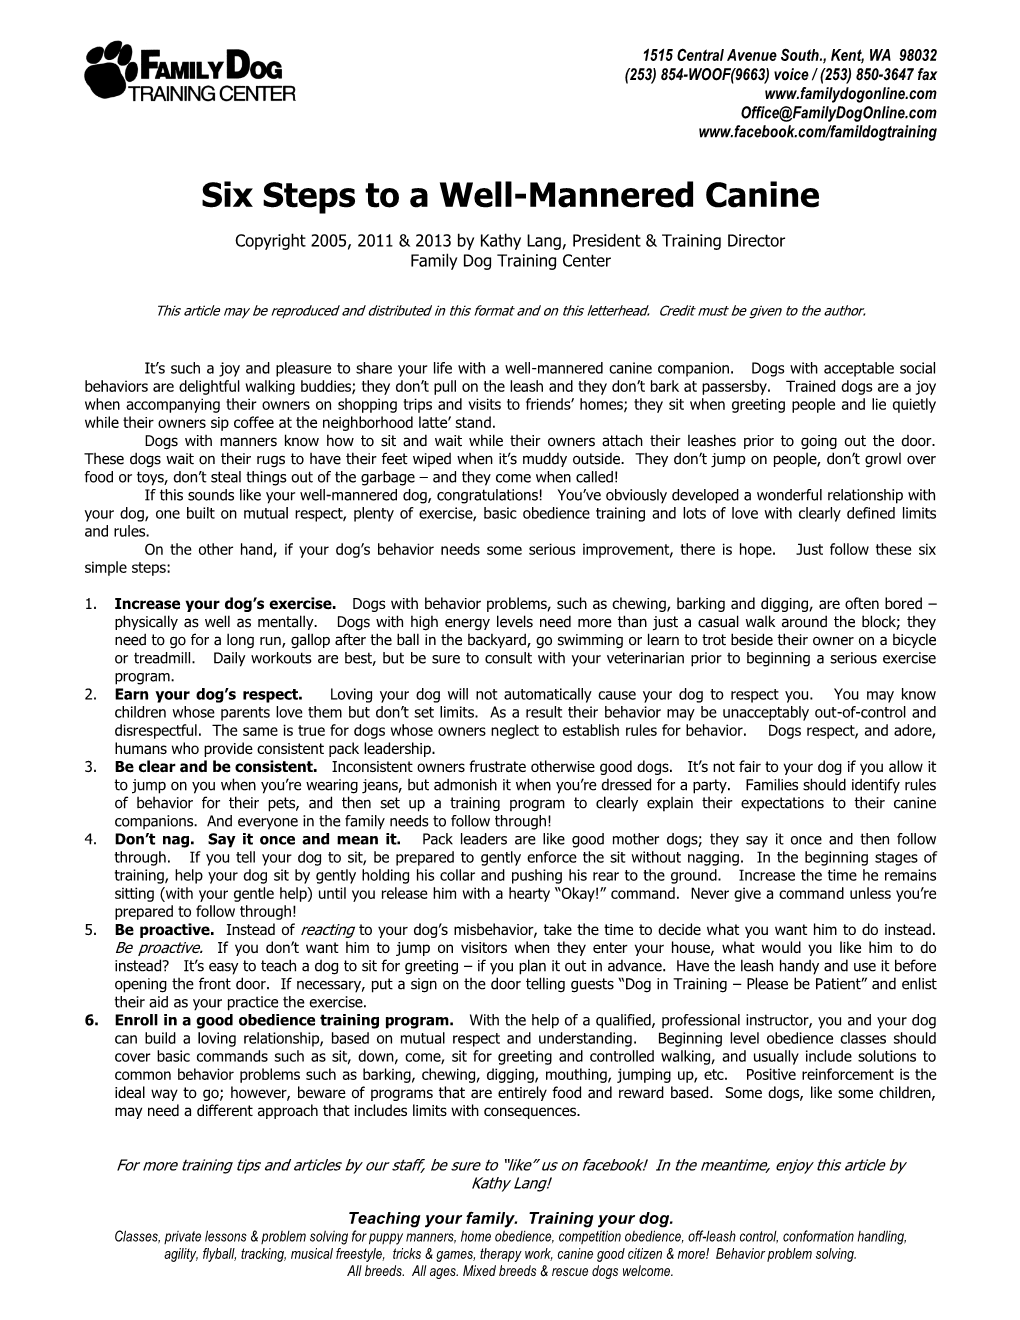 Six Steps to a Well Mannered Canine